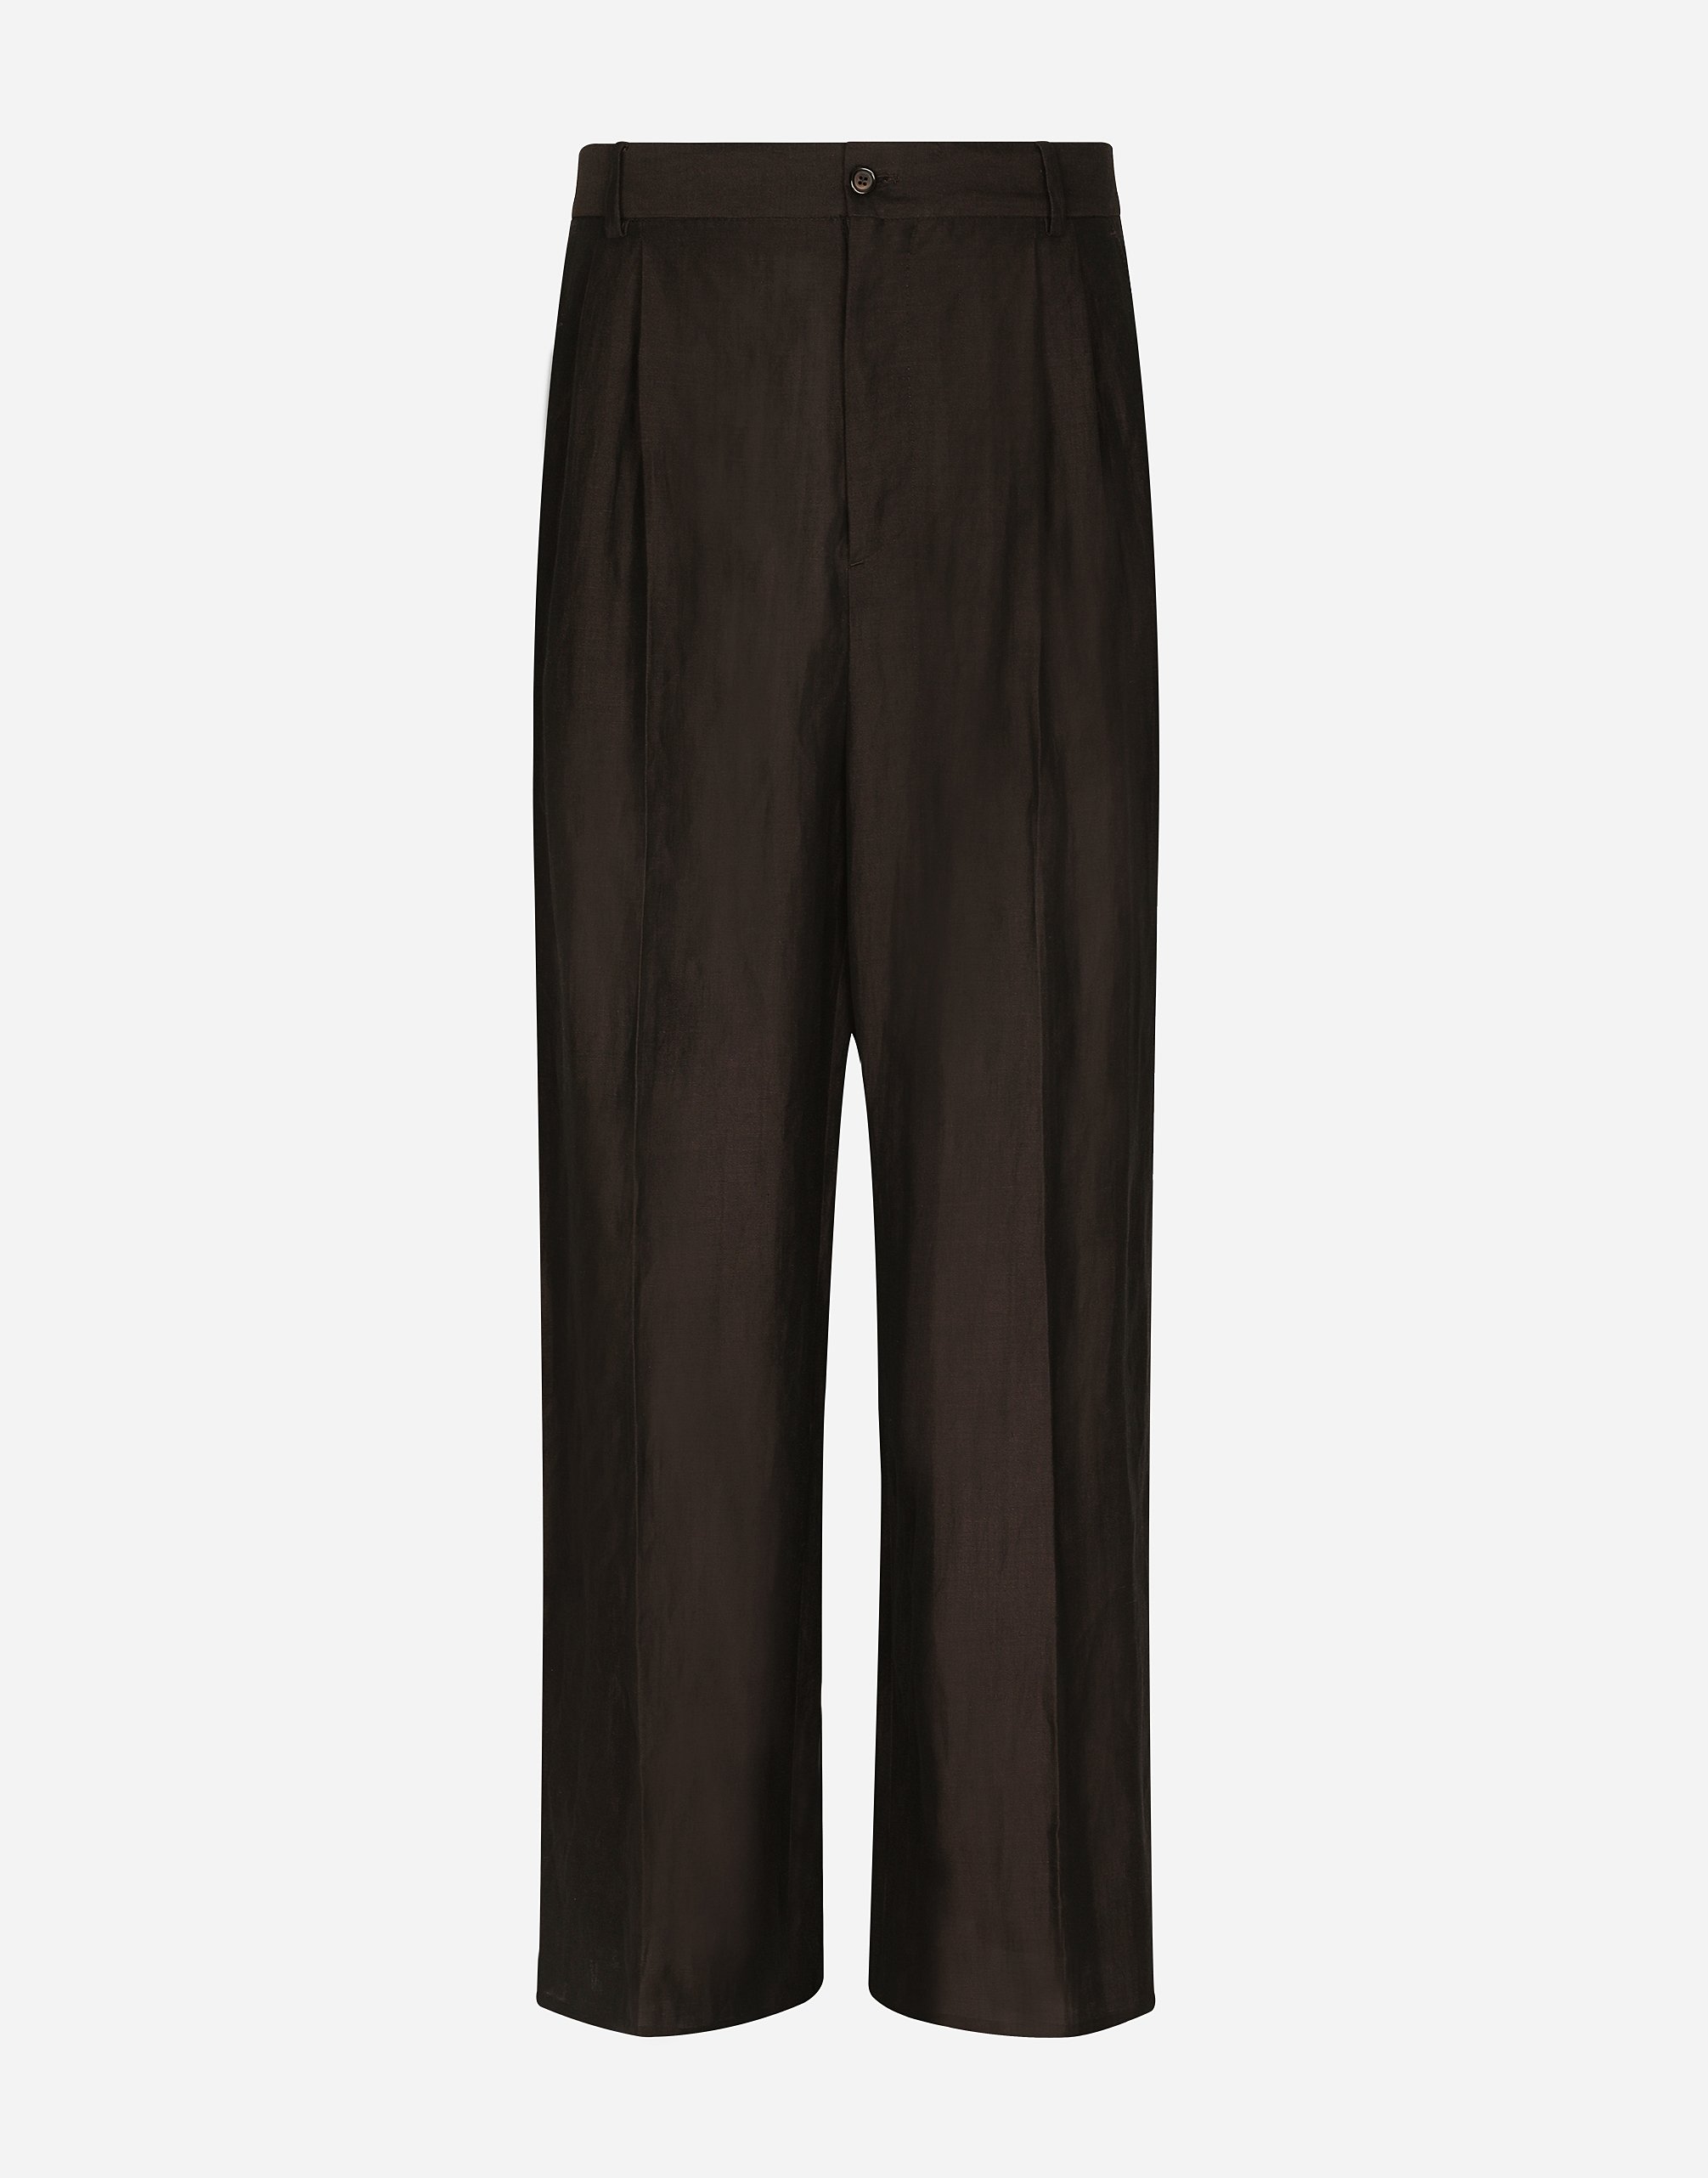 Dolce & Gabbana Tailored Viscose And Linen Pants In Ebony